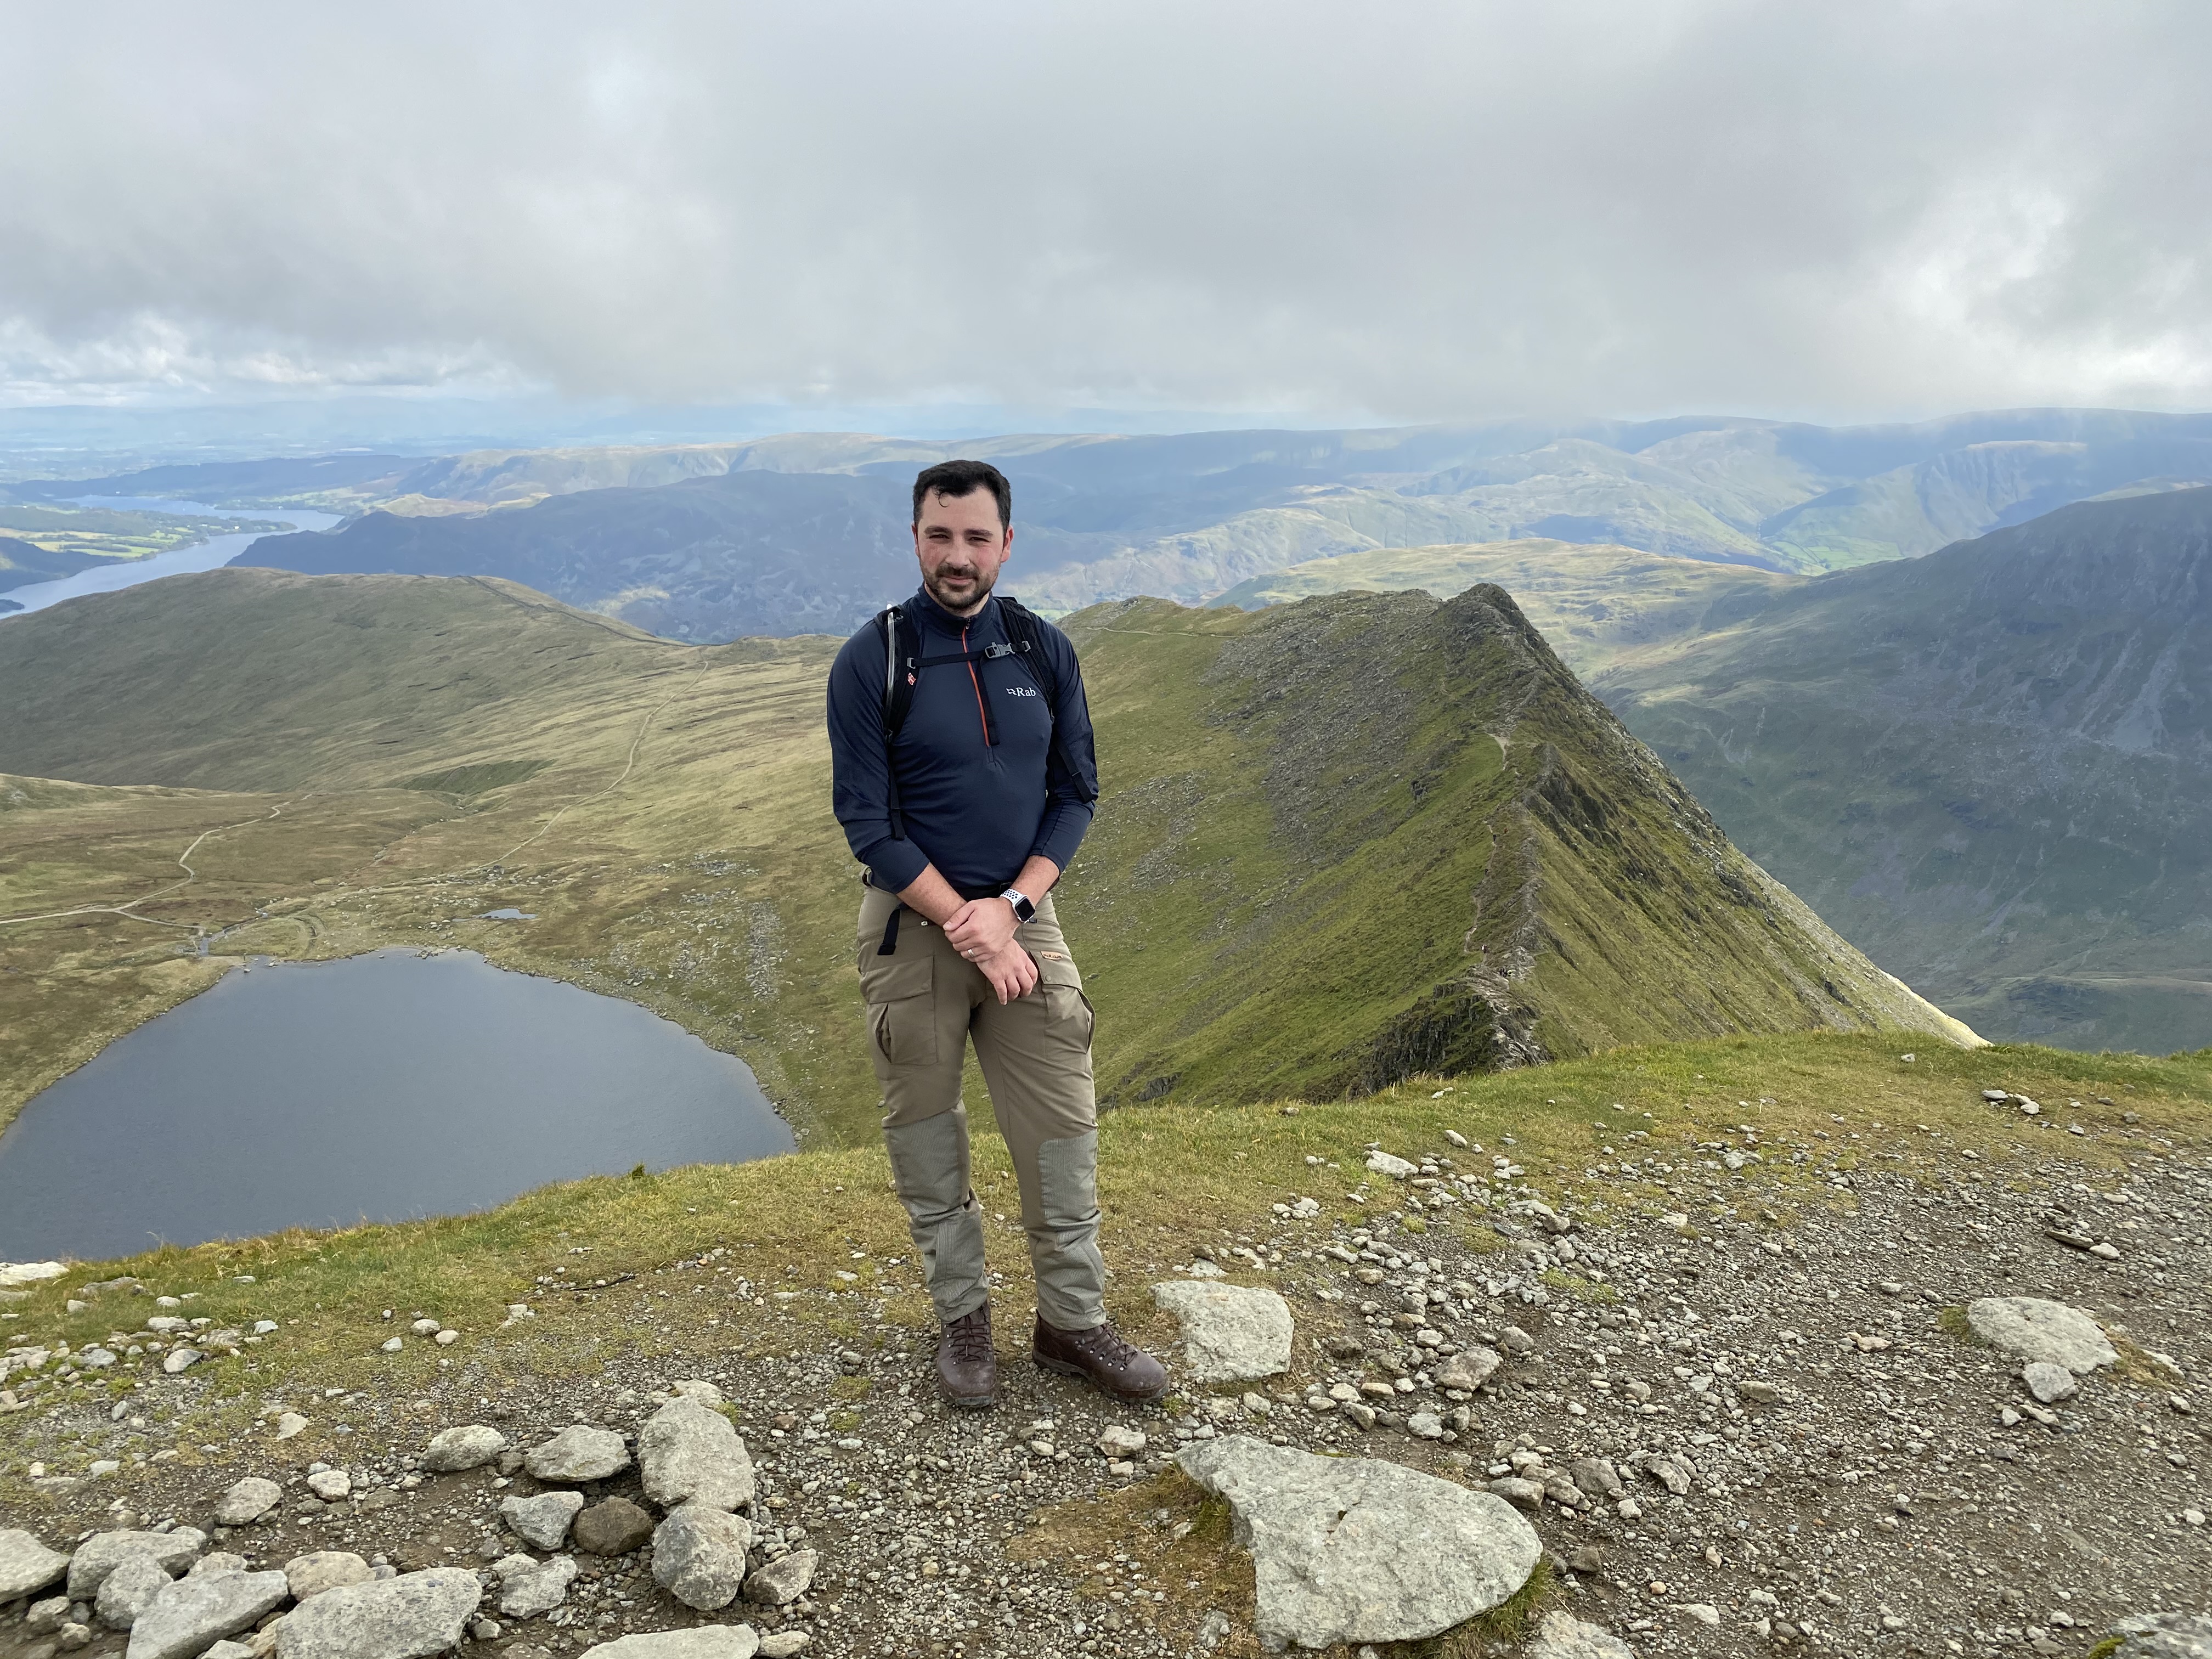 Nicky at the top of Helvellyn, with Striding edge in the background